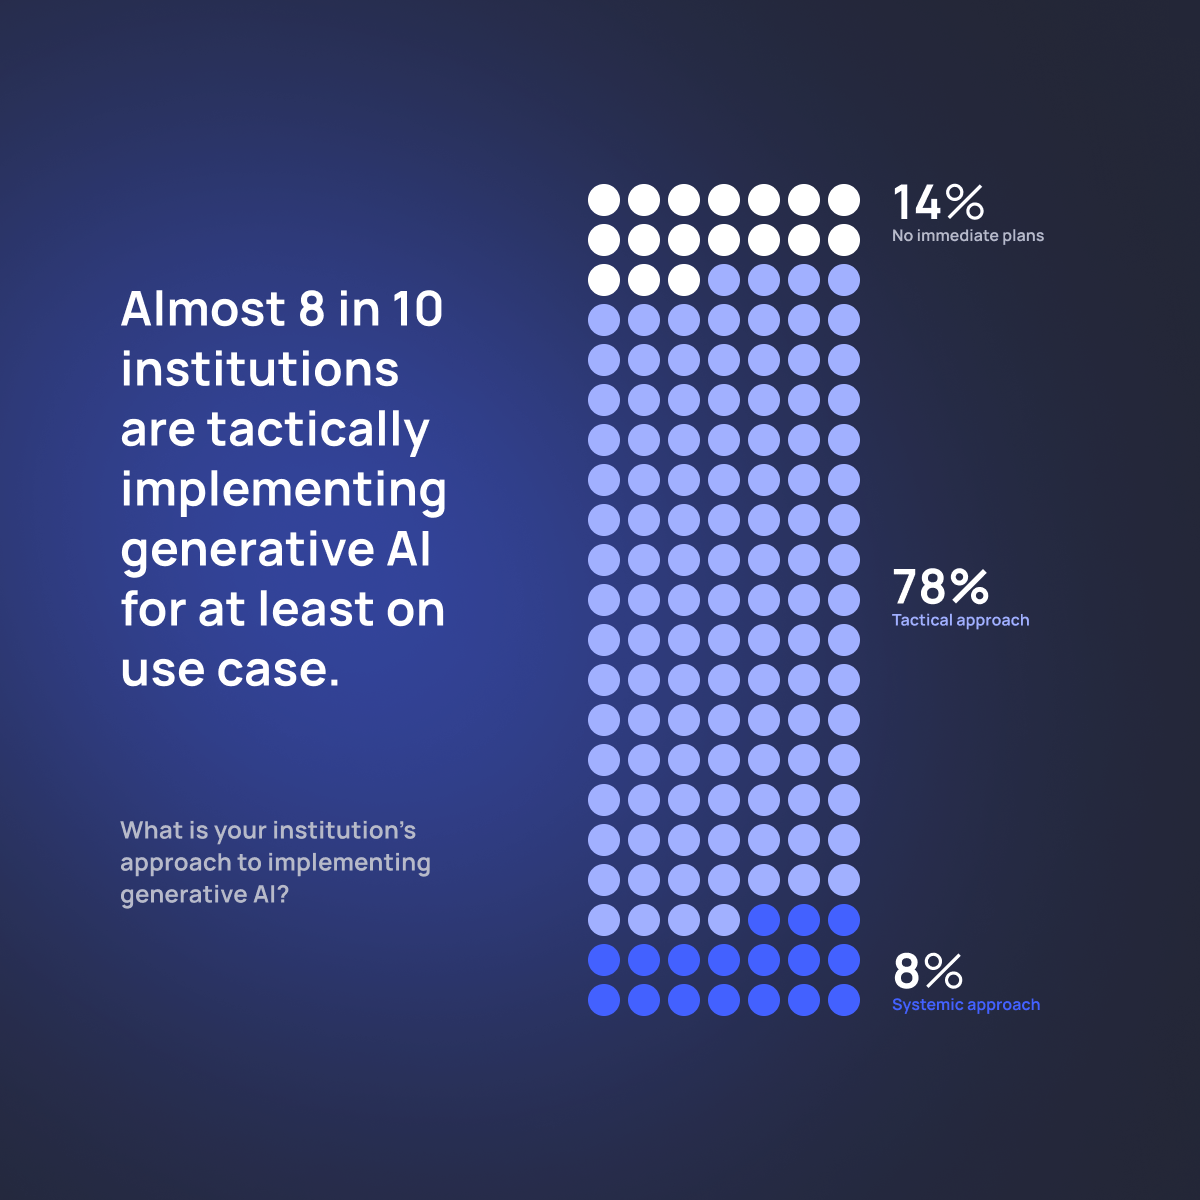 Number of Institutions Implementing Generative AI - TreasurUpdate Newsletter